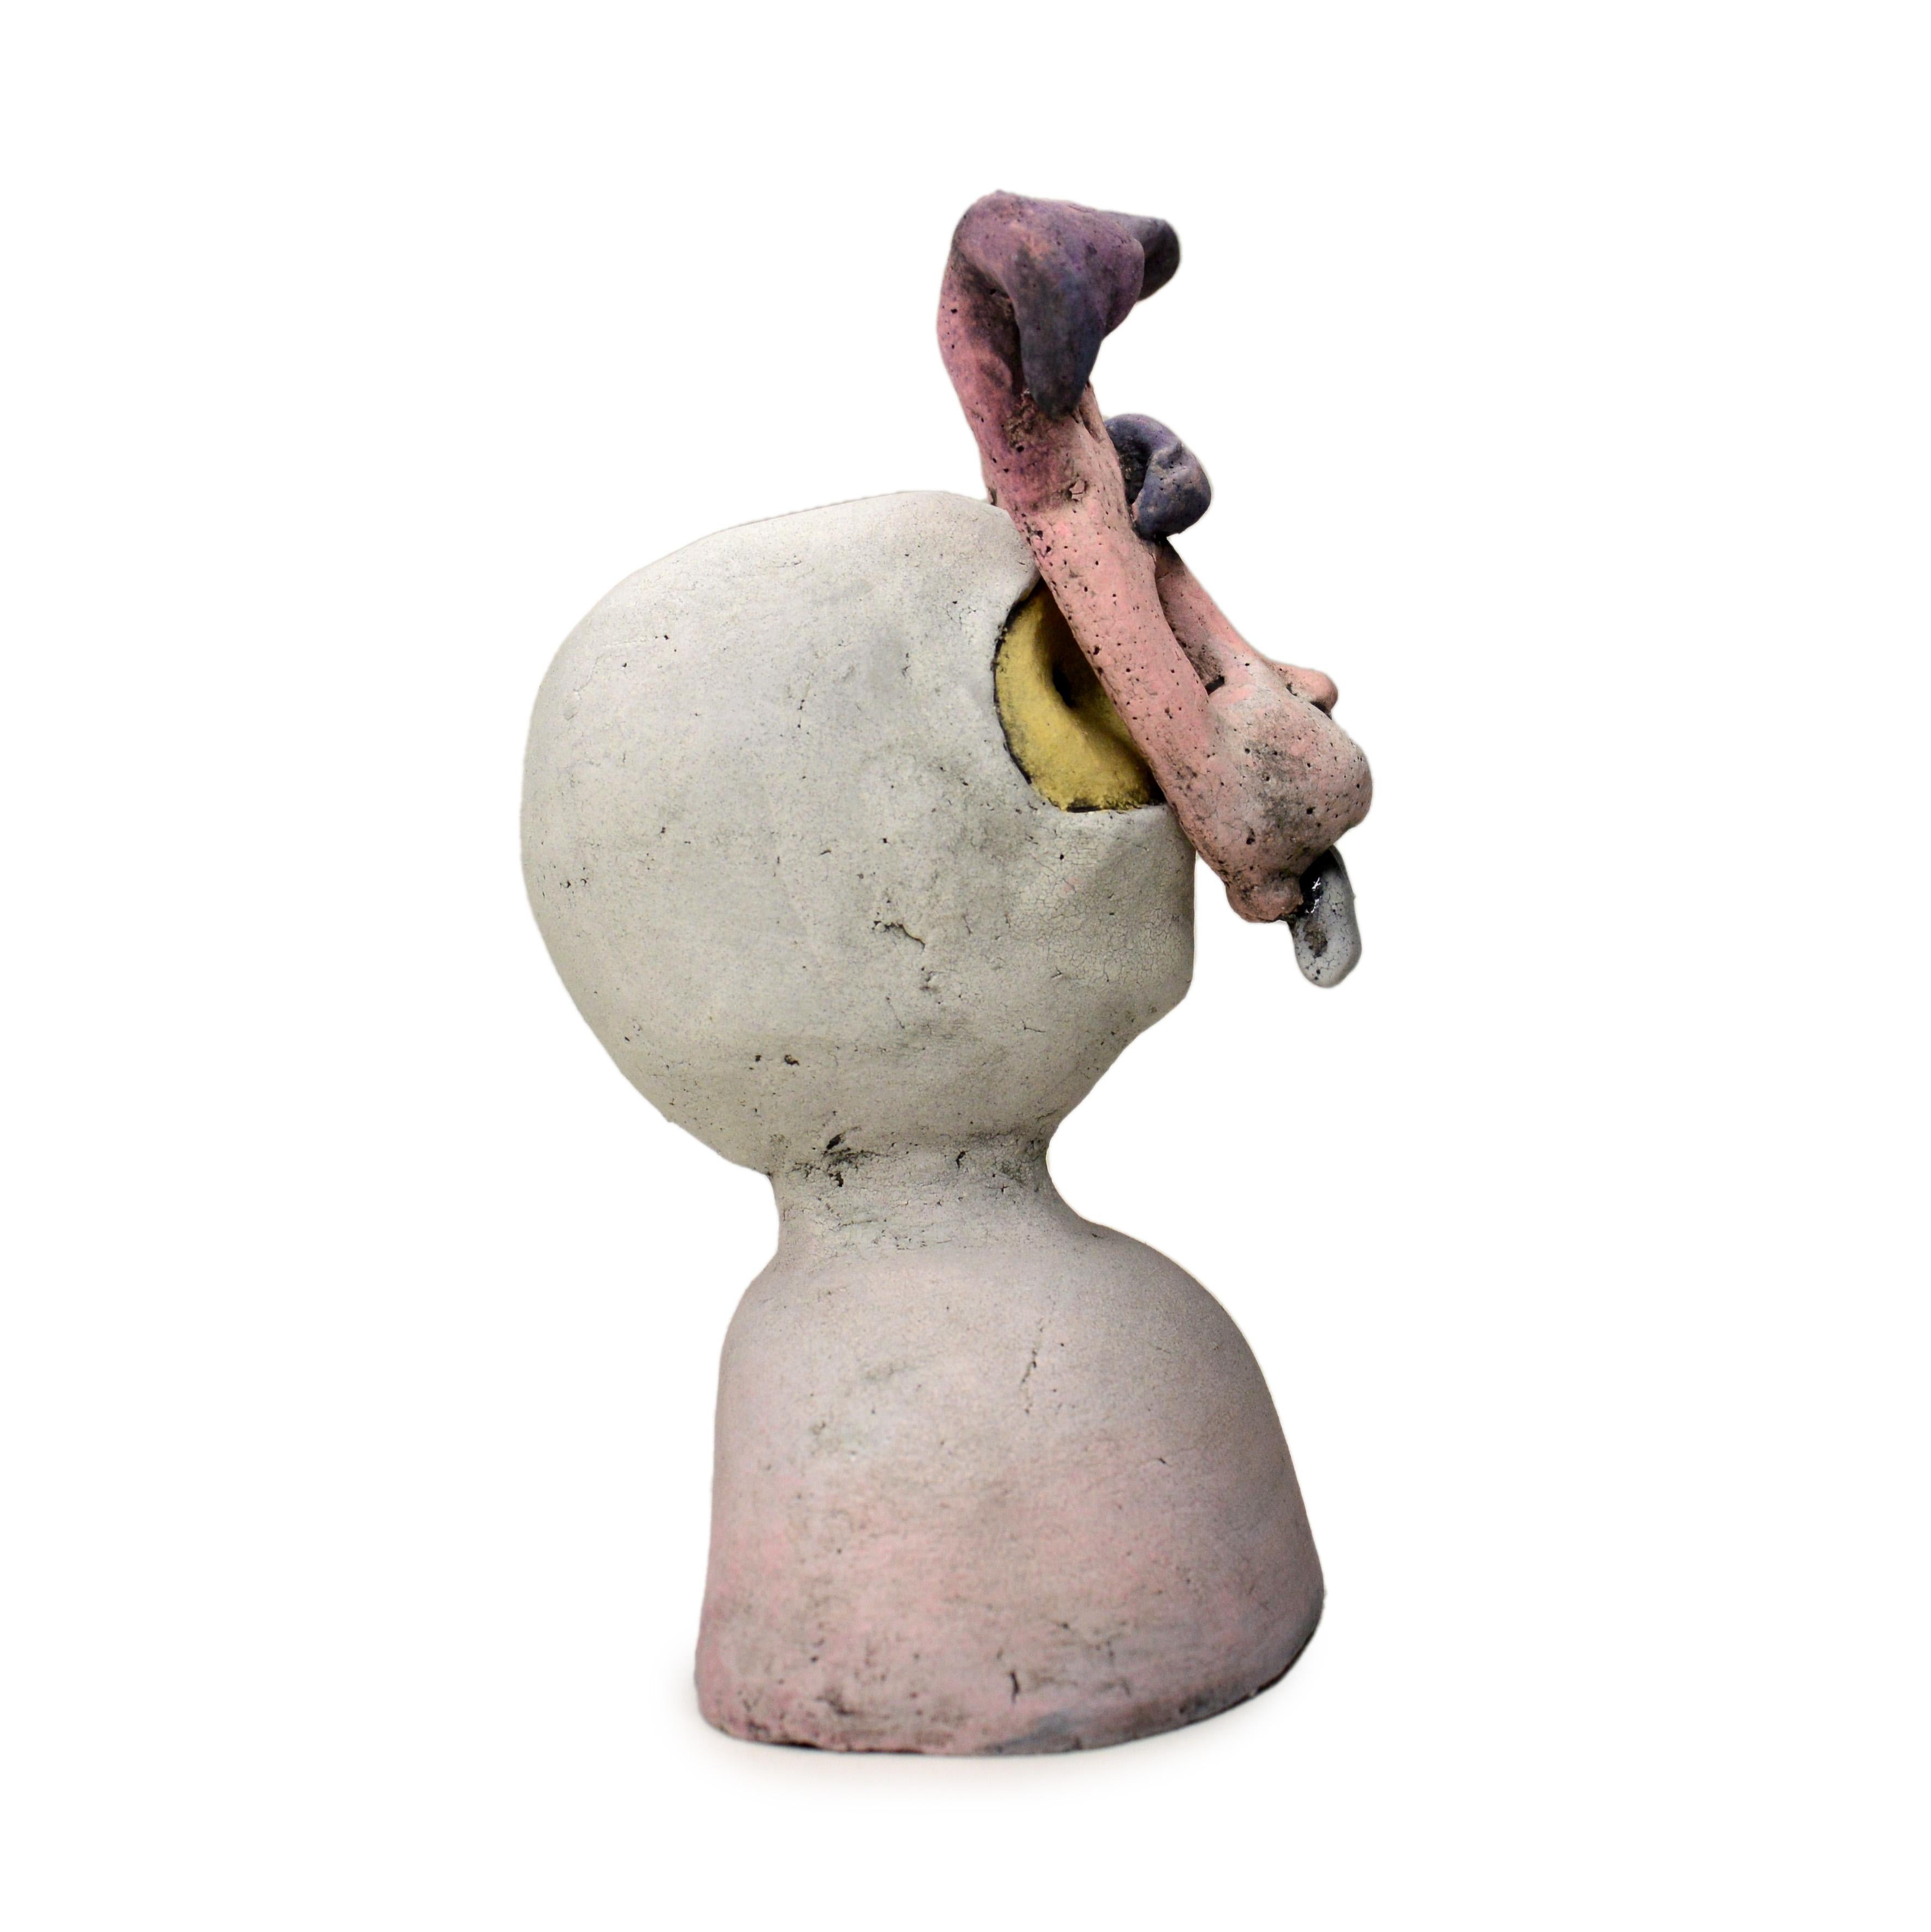 Pineco number 0008 Original Ceramic sculpture with a bunny mask representing fertility, luck, and creativity.

Meet a variety of characters with distinct masks and postures. These sculptures are fascinating and make you curious, encouraging you to